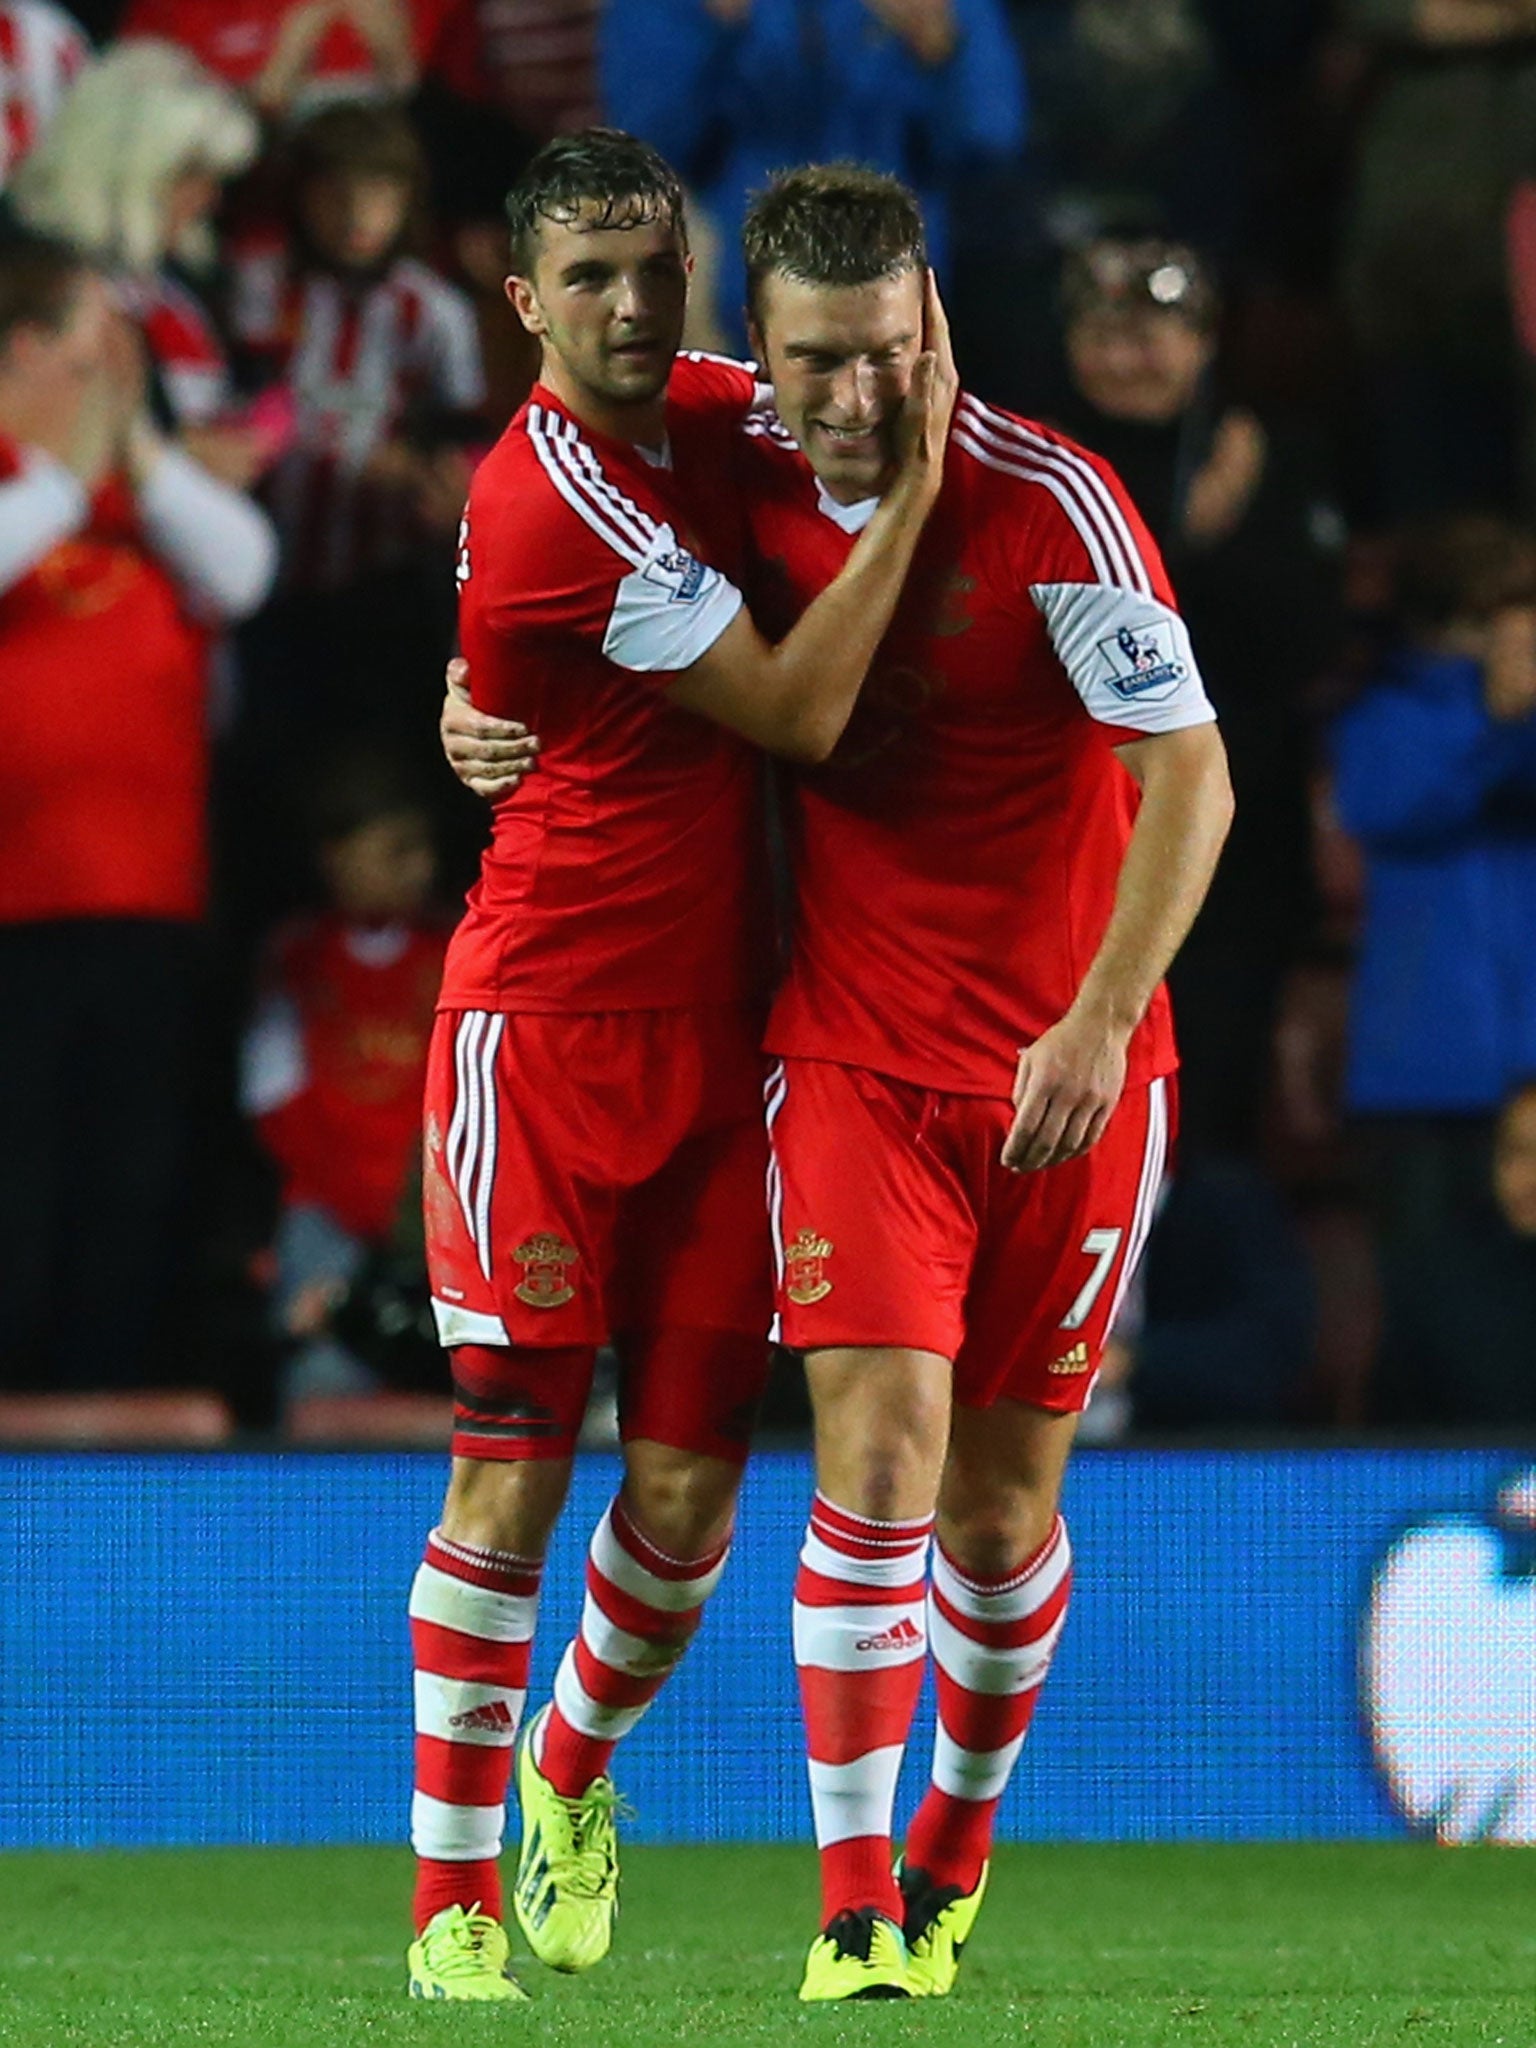 Jay Rodriguez will join Southampton team-mate Rickie Lambert in the England squad